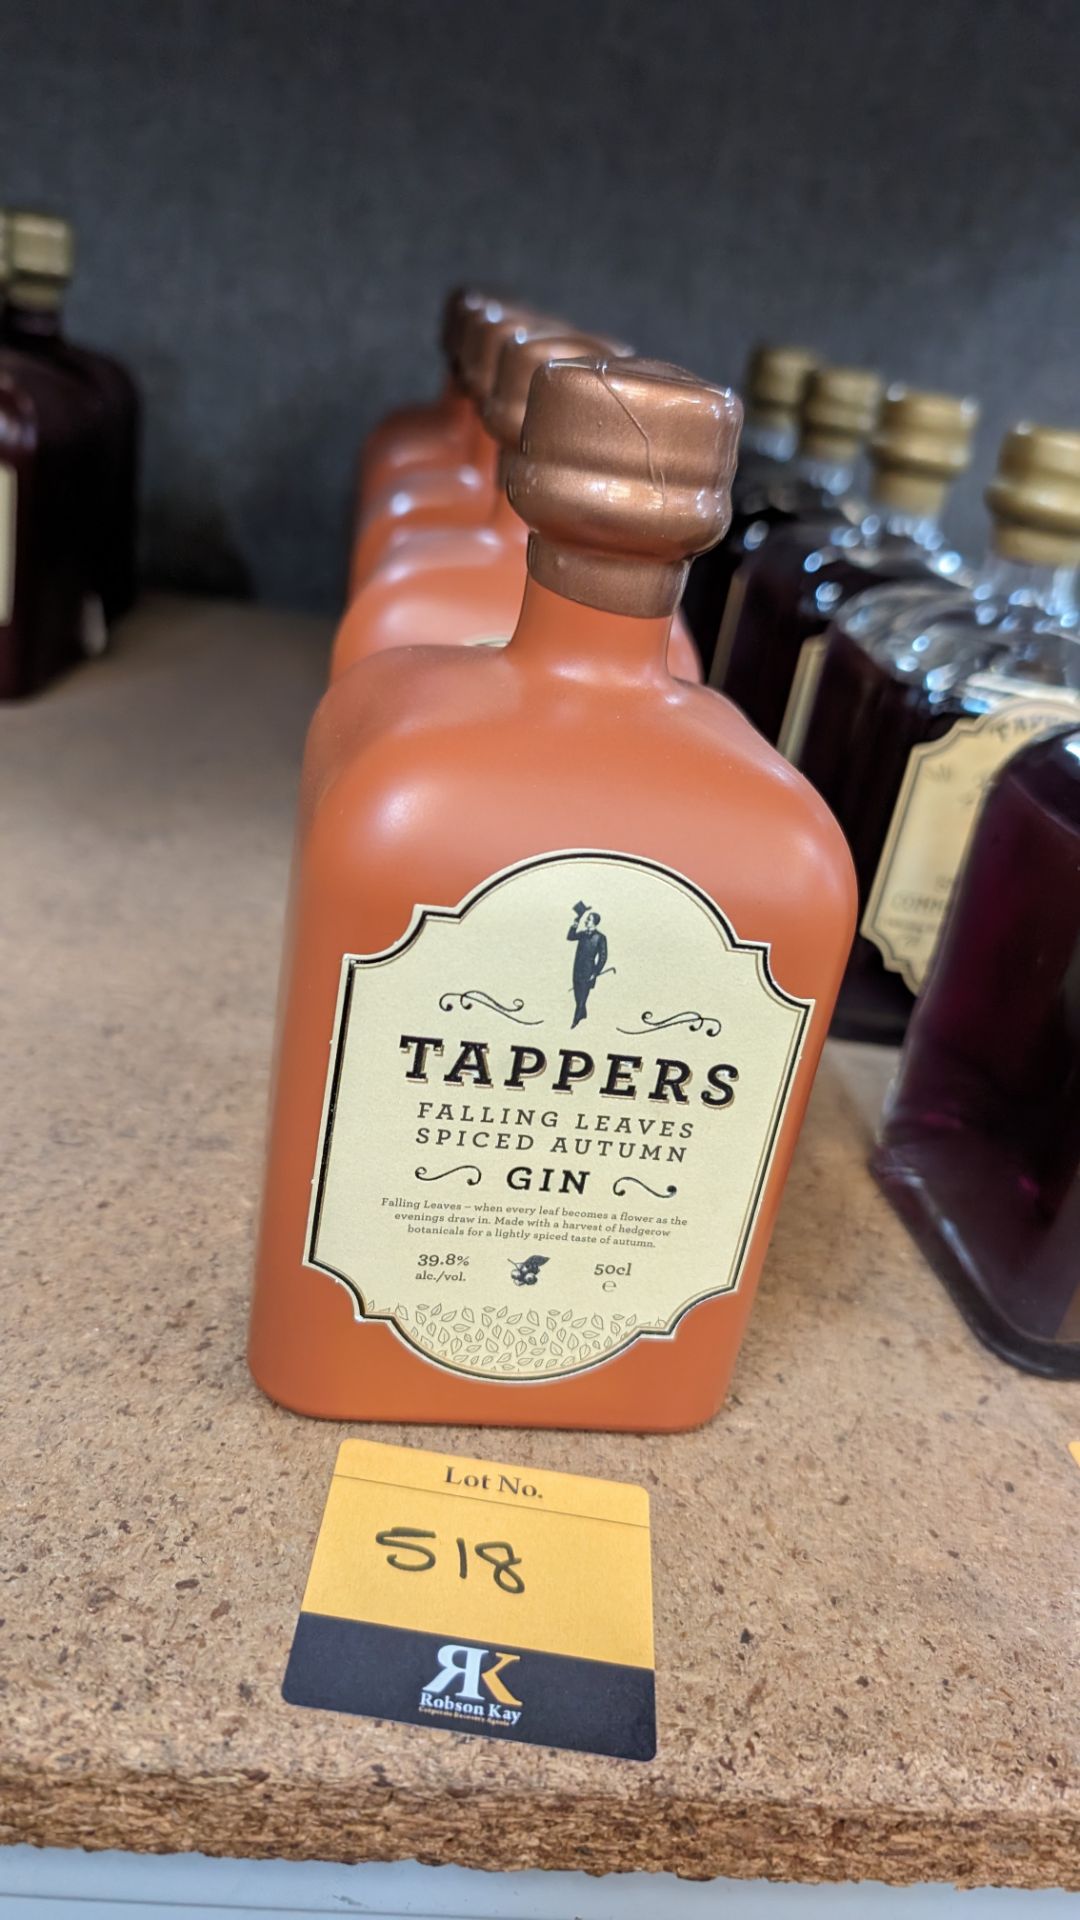 5 off 500ml bottles of Tappers 39.8% ABV Falling Leaves Spiced Autumn Gin. Sold under AWRS number X - Image 2 of 4